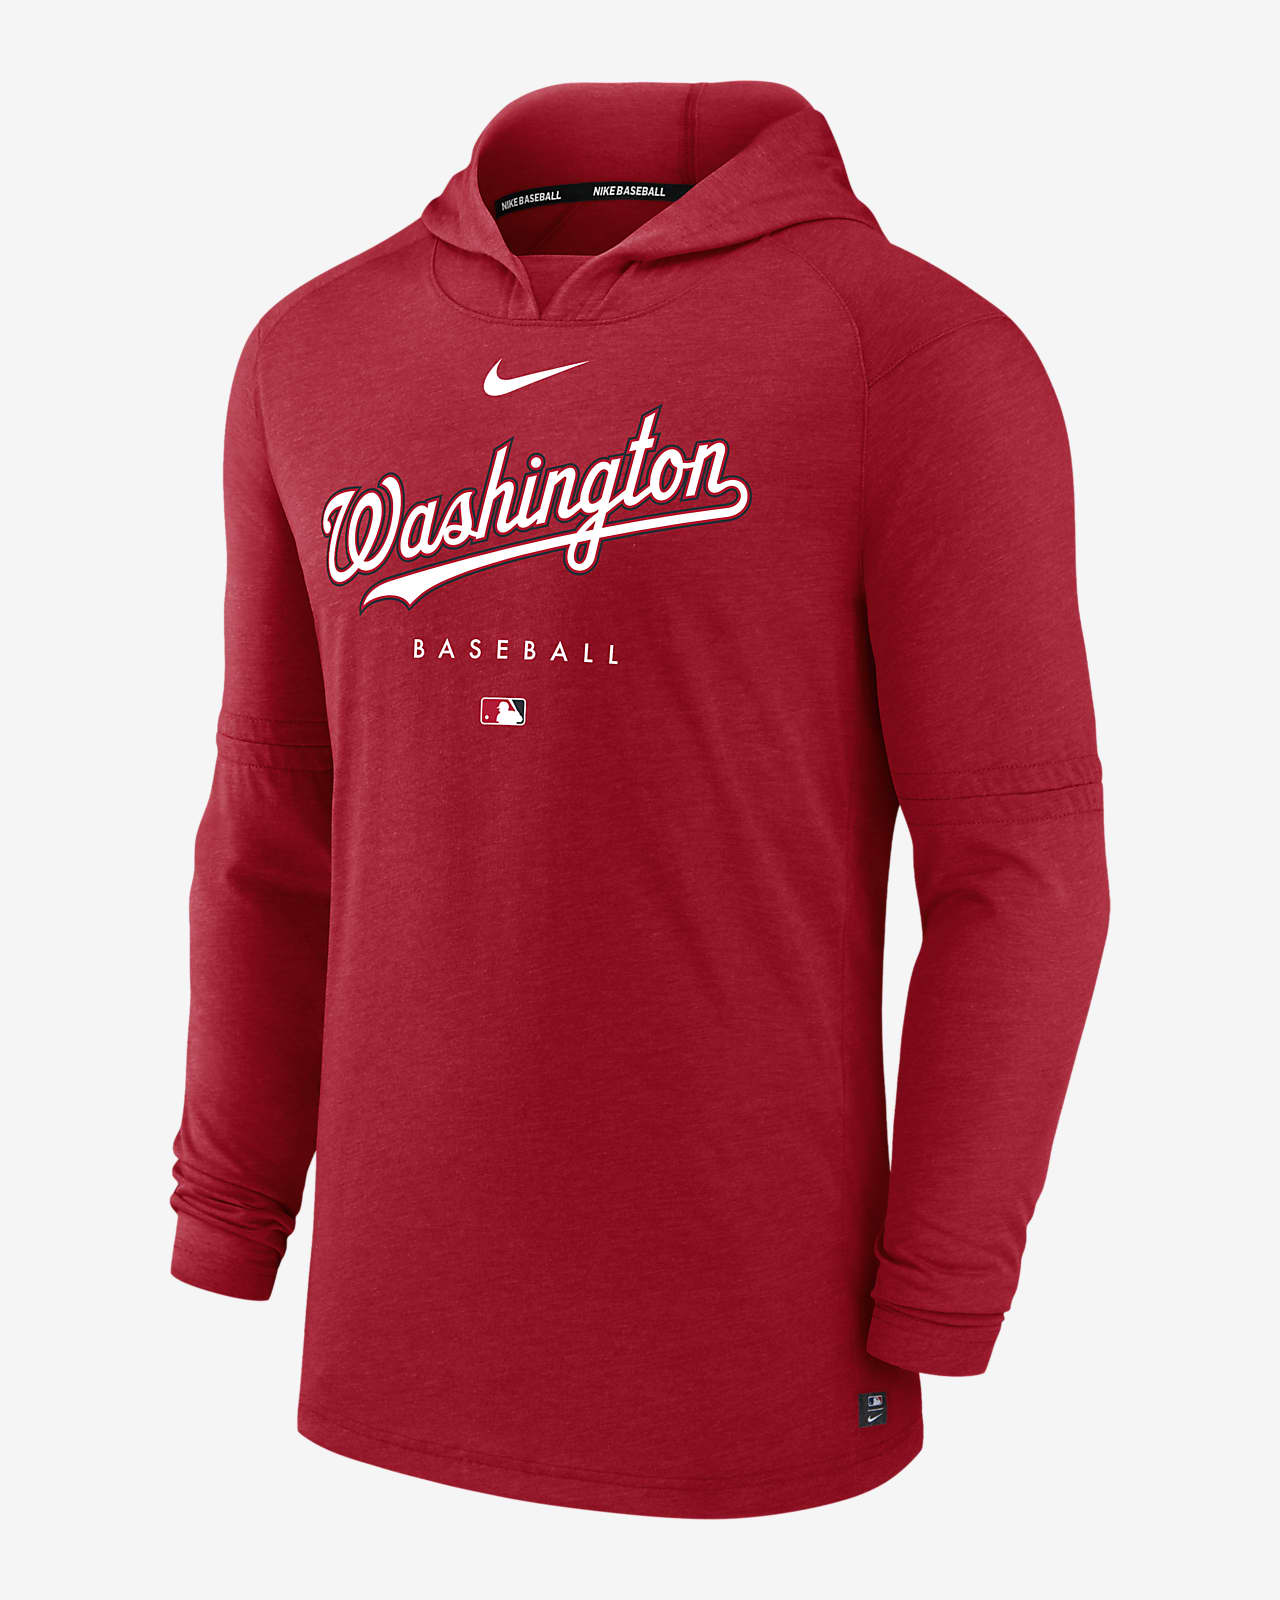 Nike Dri-FIT Early Work (MLB Washington Nationals) Men's Pullover Hoodie